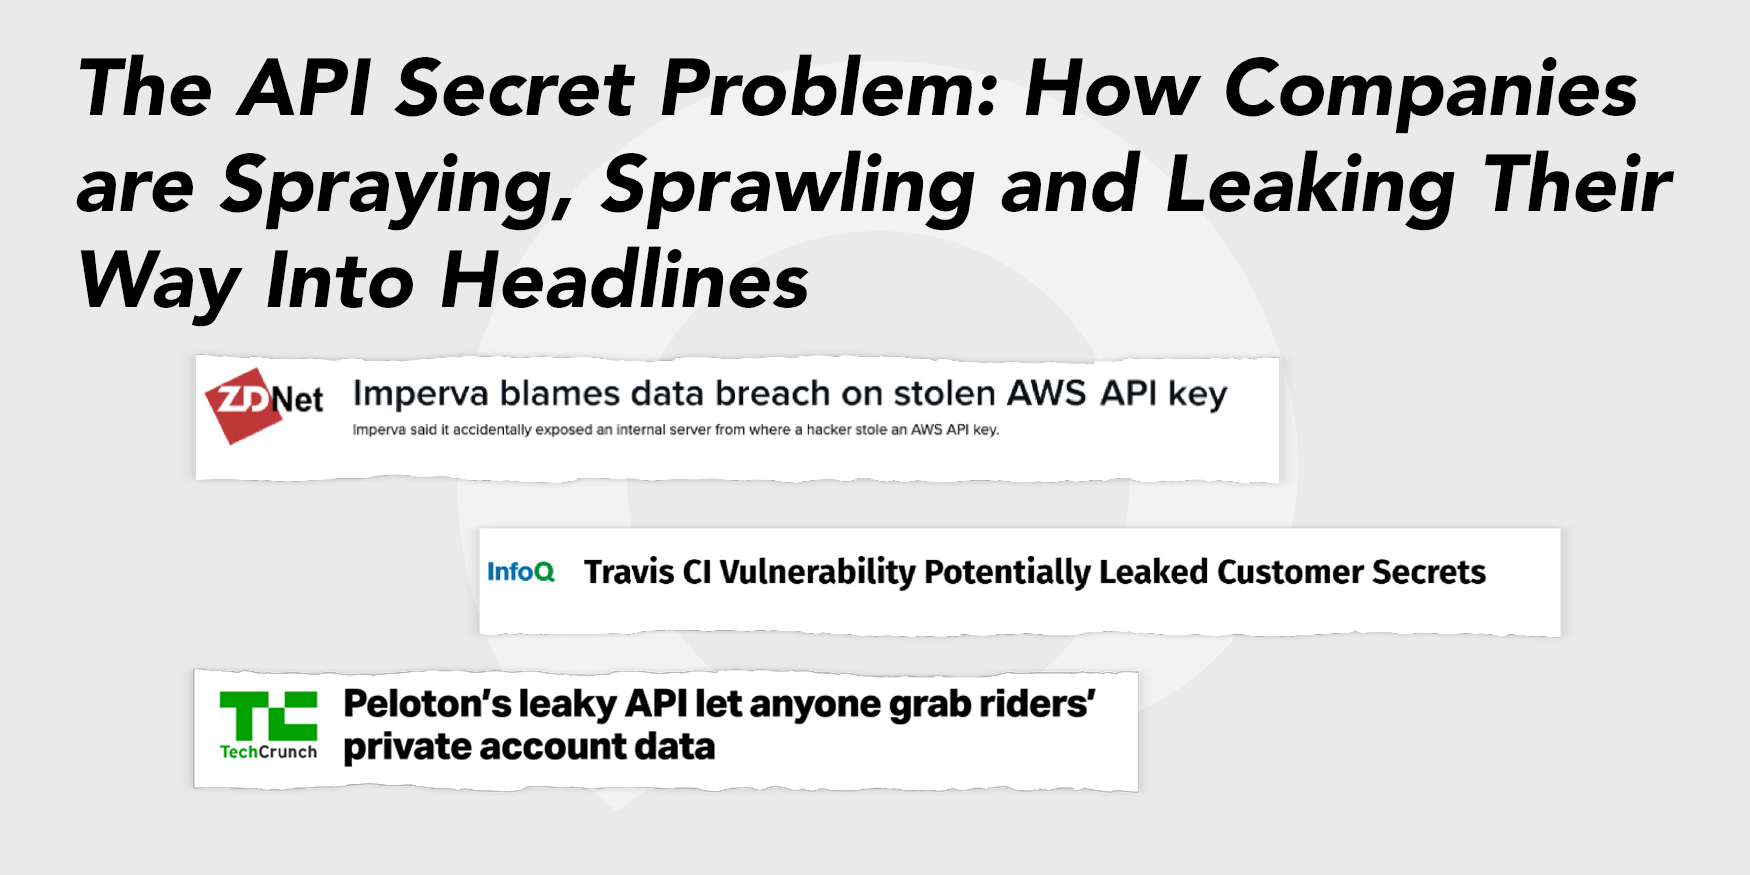 The API Secret Problem: How Companies are Spraying, Sprawling and Leaking Their Way Into Headlines